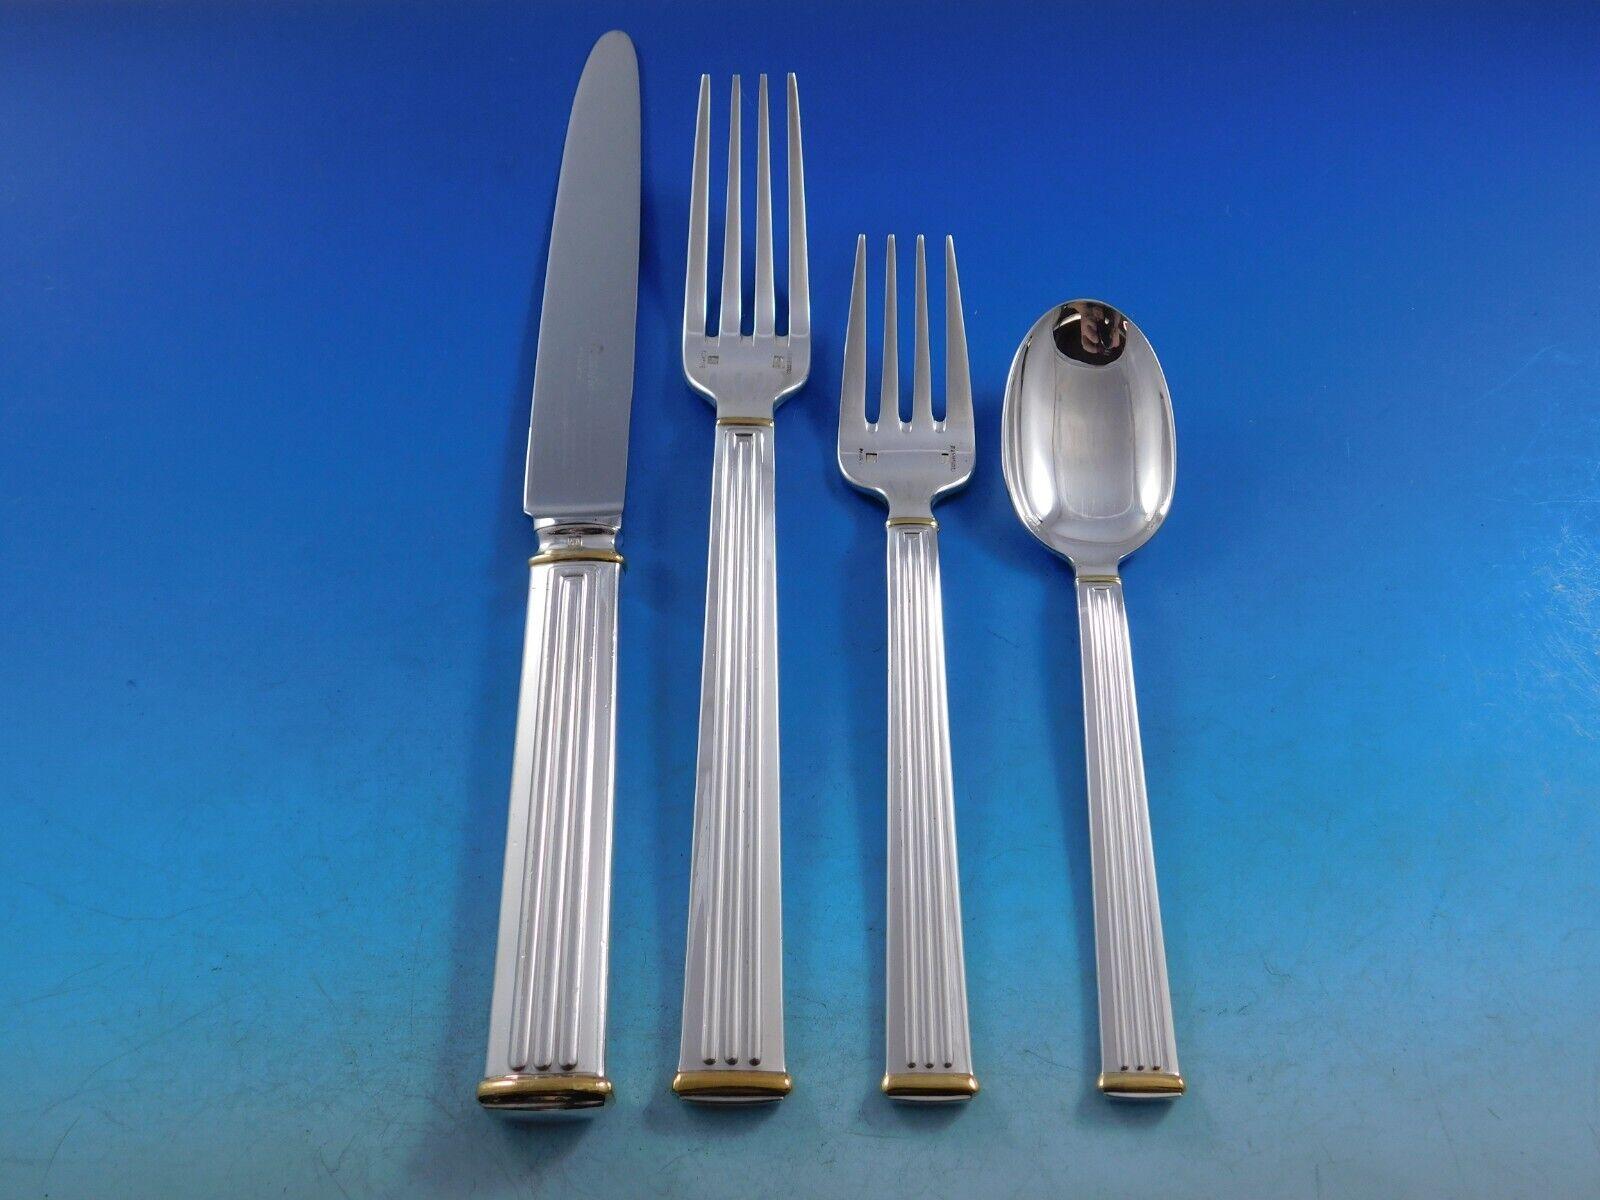 Modern clean lines in a Classic column motif makes this pattern, Triade, forever timeless. 
Dinner Size Triade Gold Accent by Christofle France Silverplated Flatware set - 76 pieces. This set includes:

12 Dinner Knives, 9 3/4